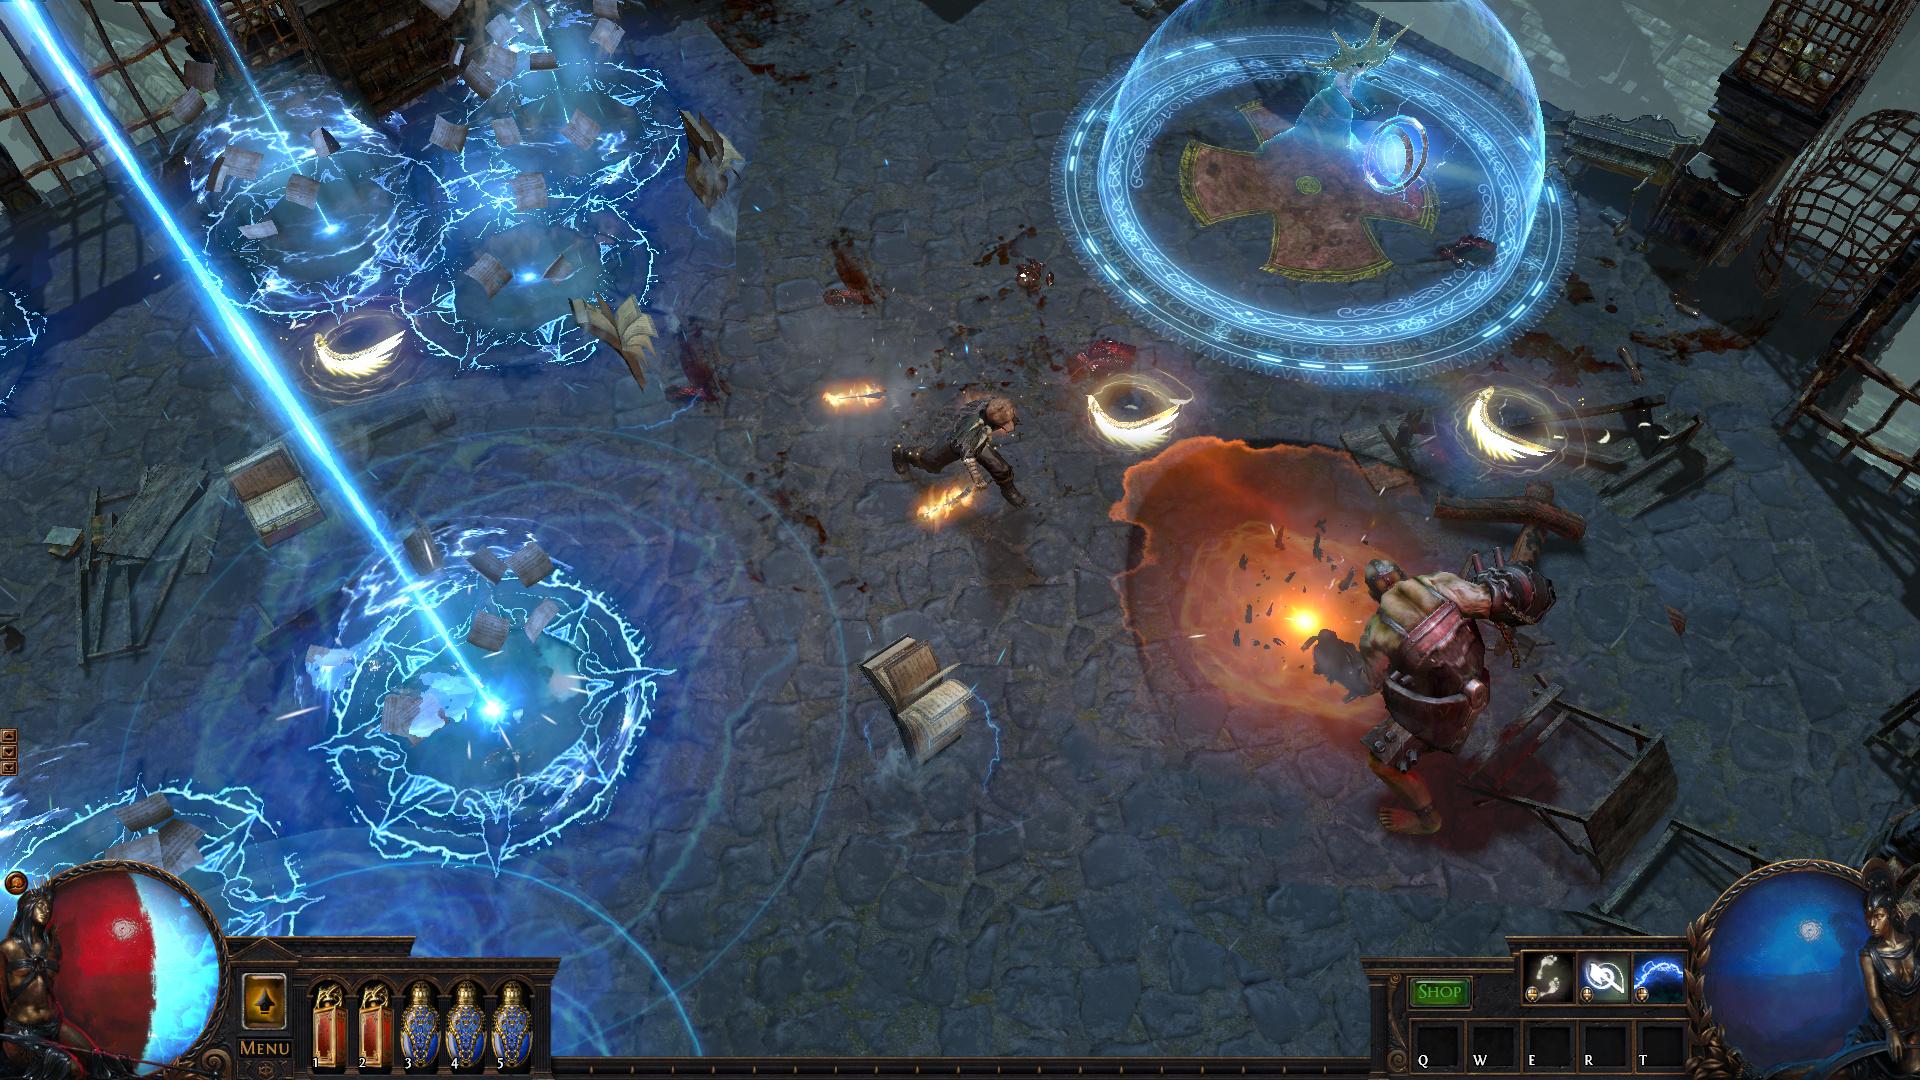 Screenshot №47 from game Path of Exile